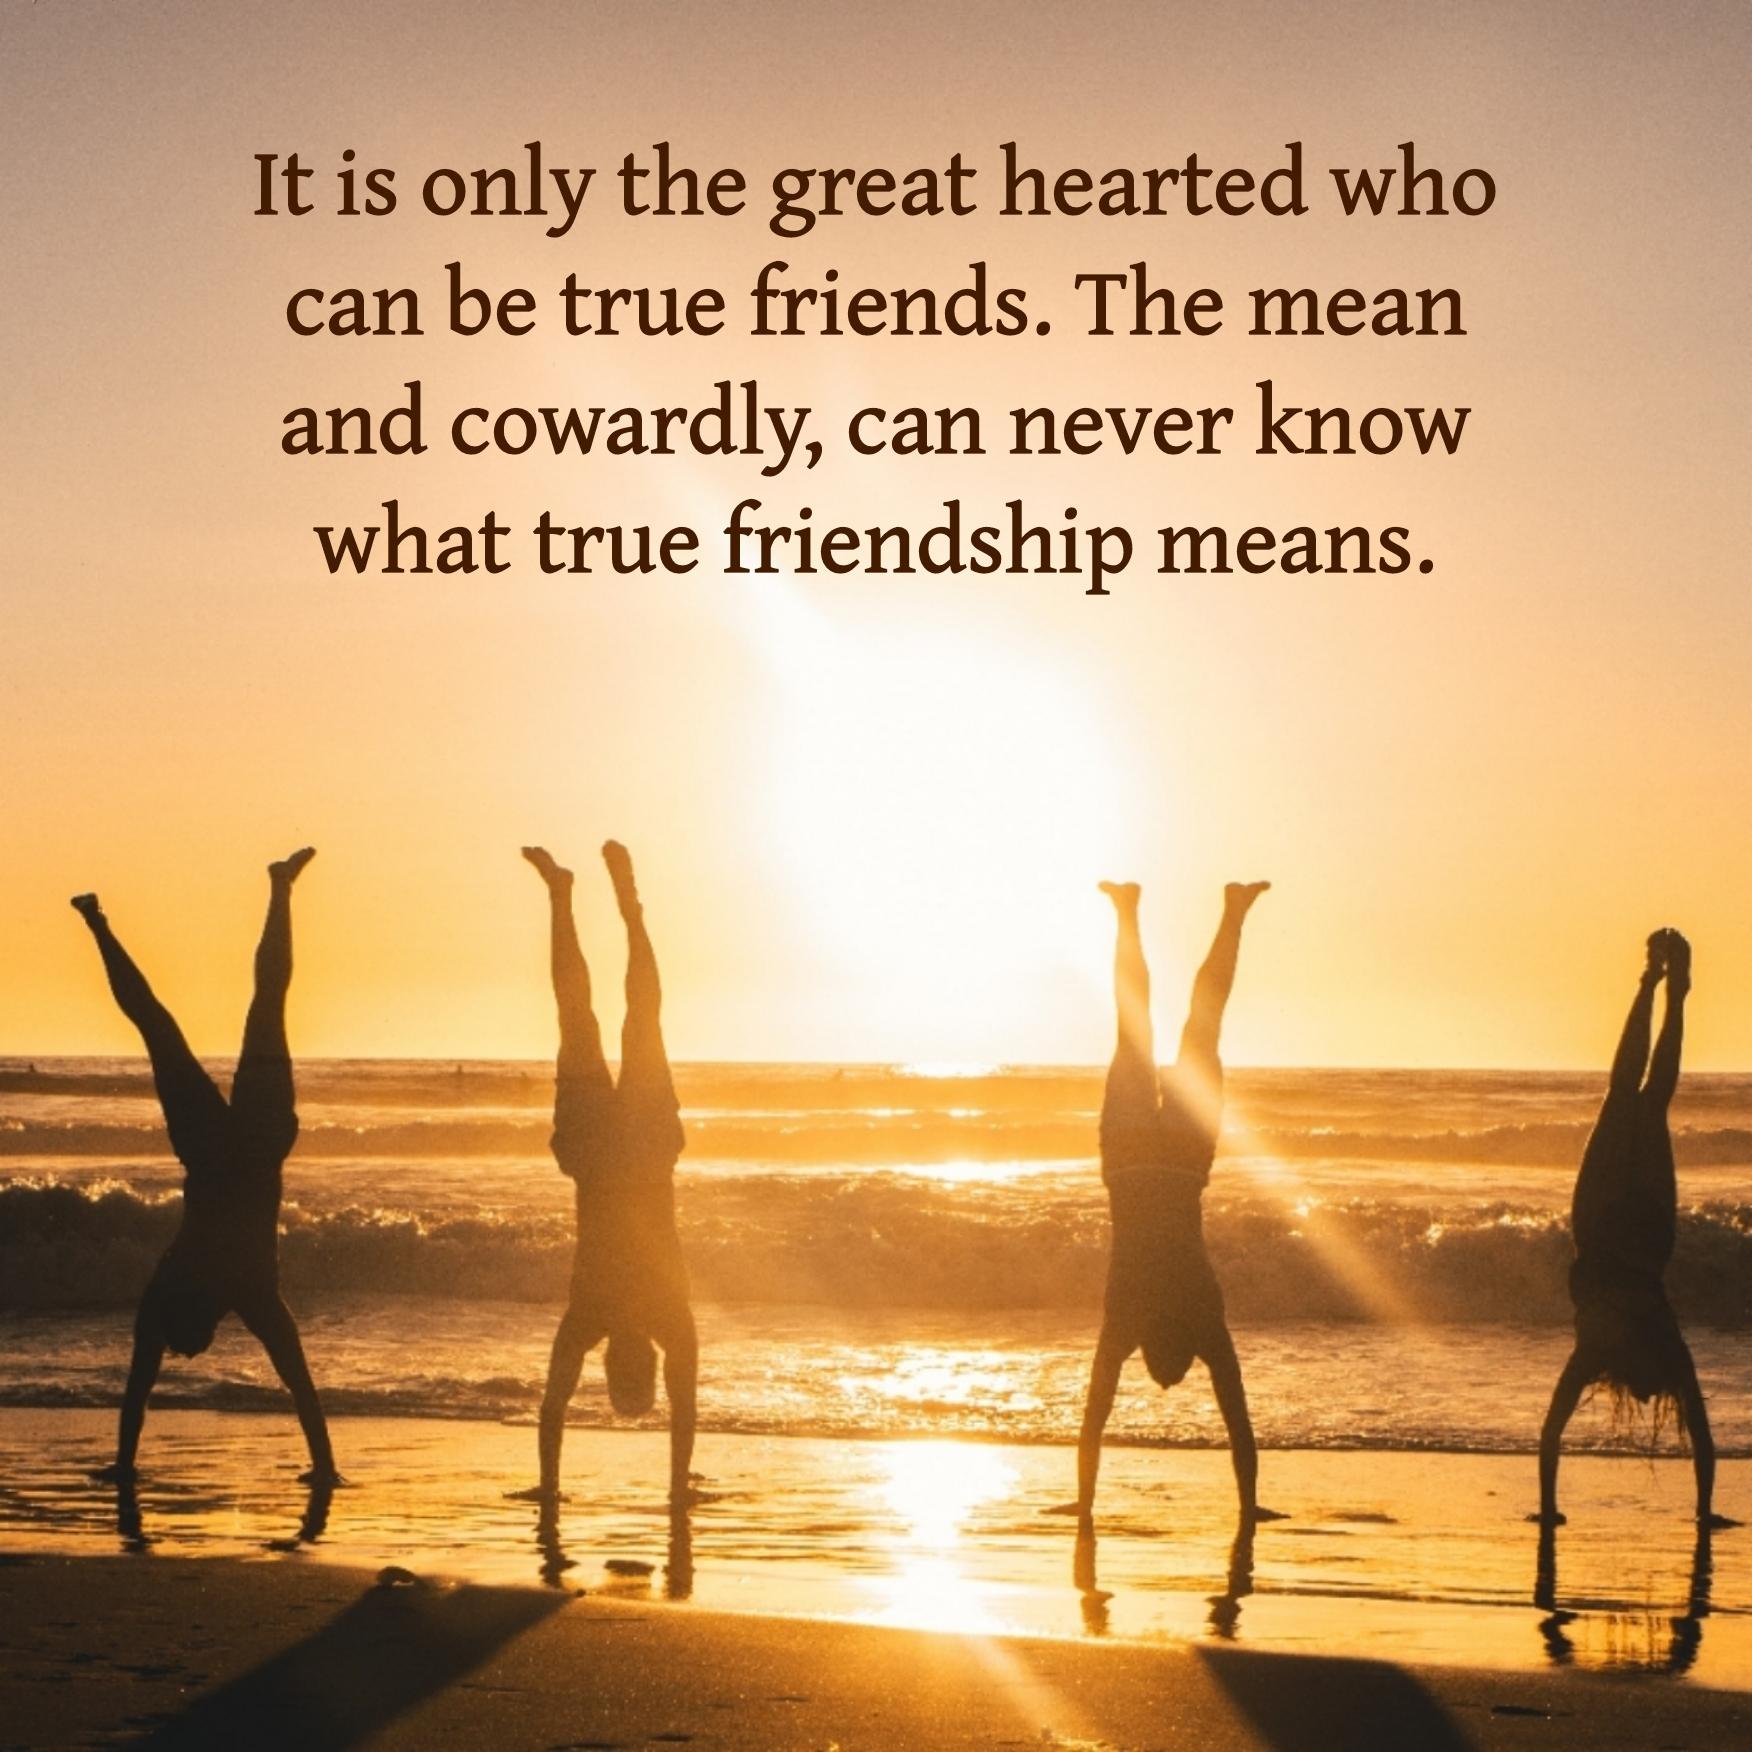 It is only the great hearted who can be true friends